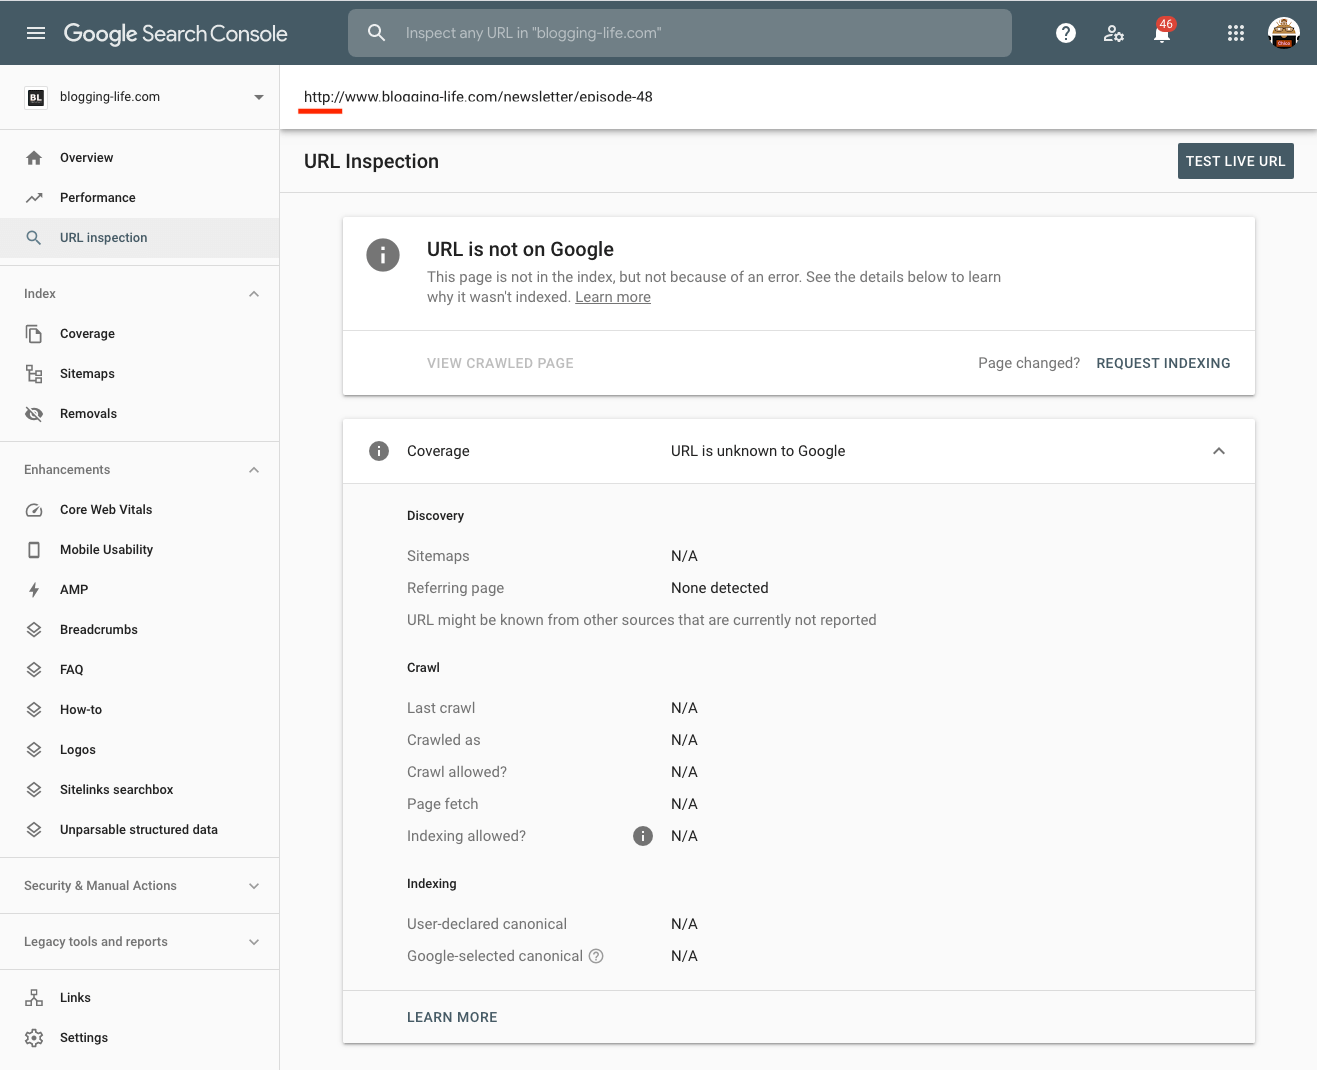 Search Console URL inspection tool test result shows unindexed.png